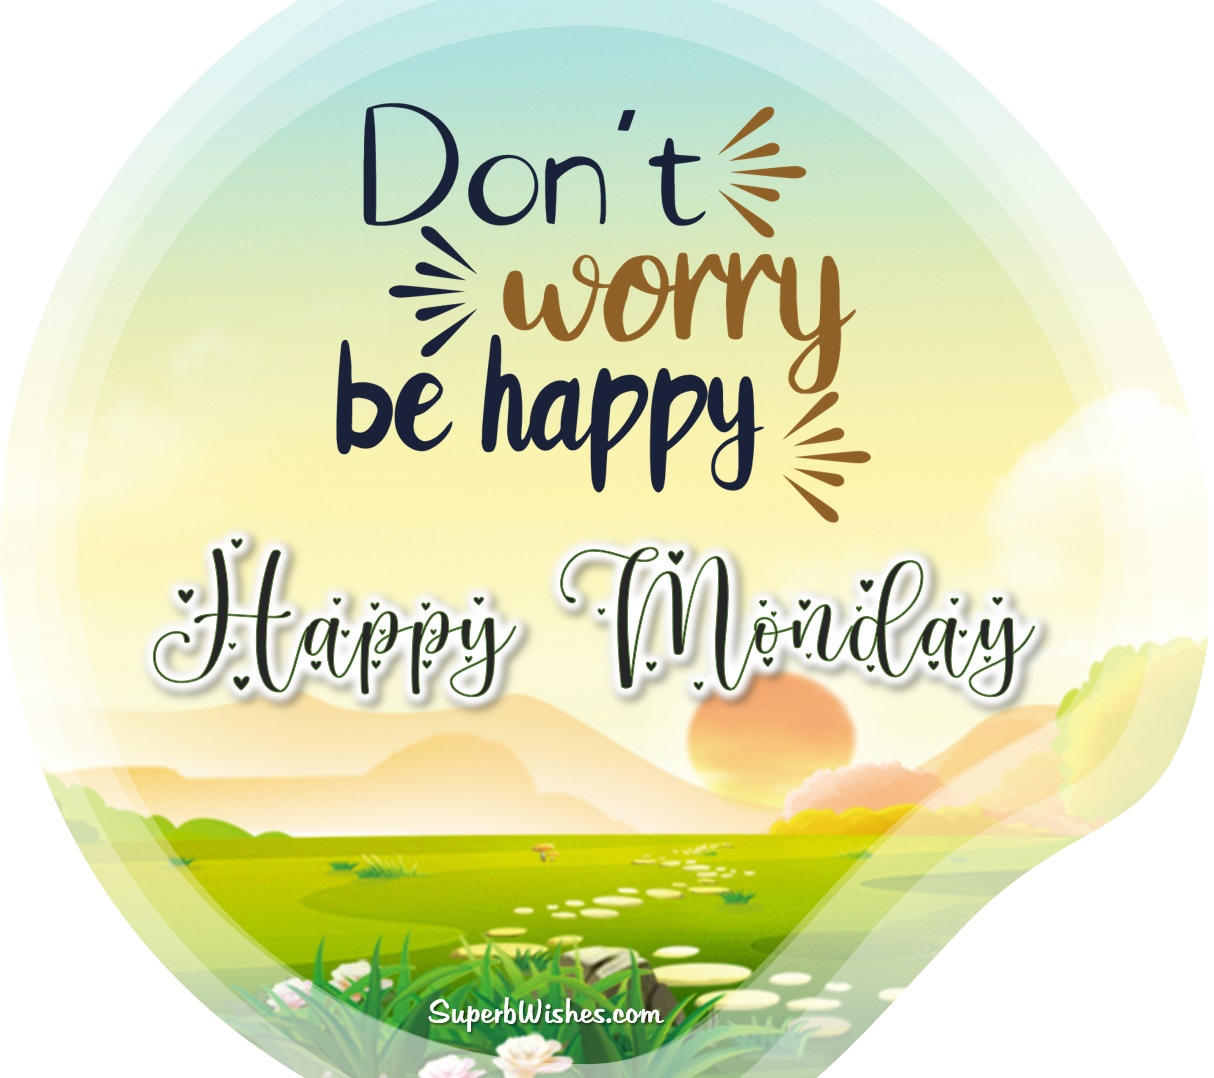 Happy Monday 2023 Images - Be Happy | SuperbWishes.com